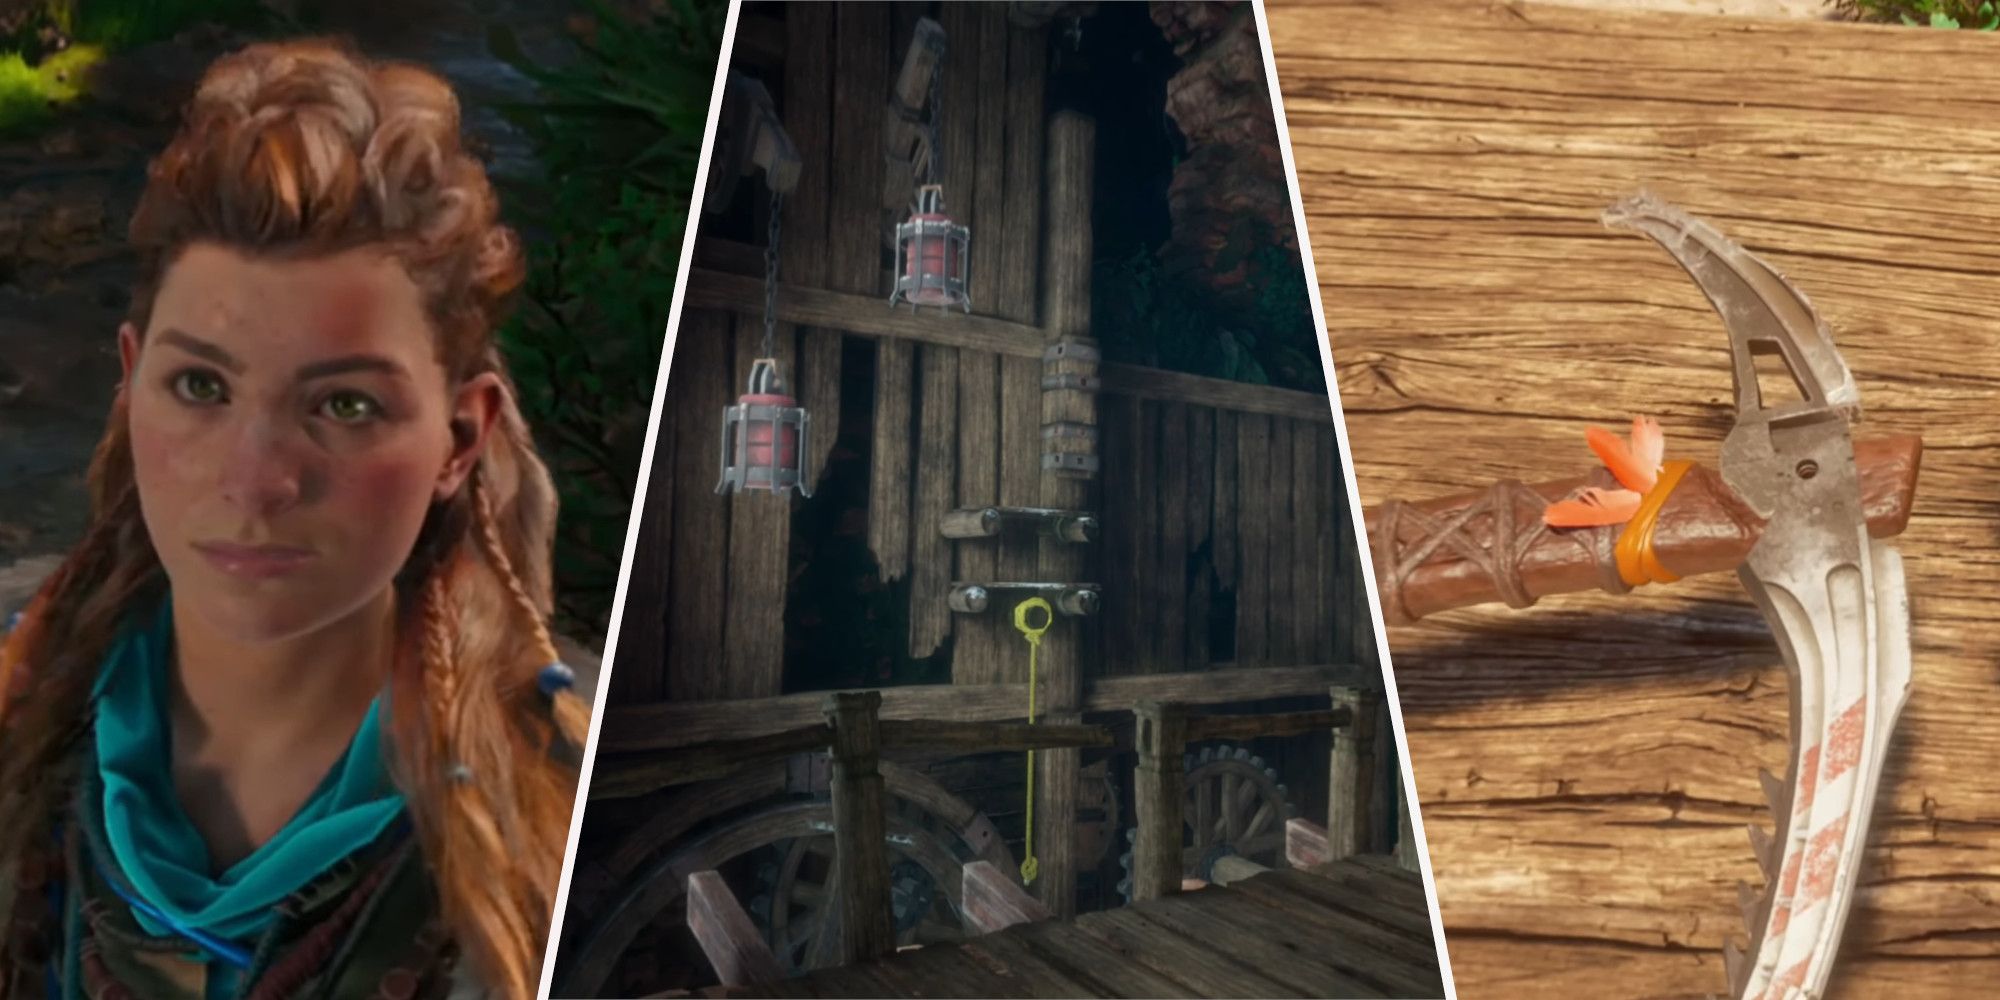 Collage image of Aloy, a ruined space inside of a wood building, and Pickaxe Crafting Station in Horizon Call Of The Mountain.